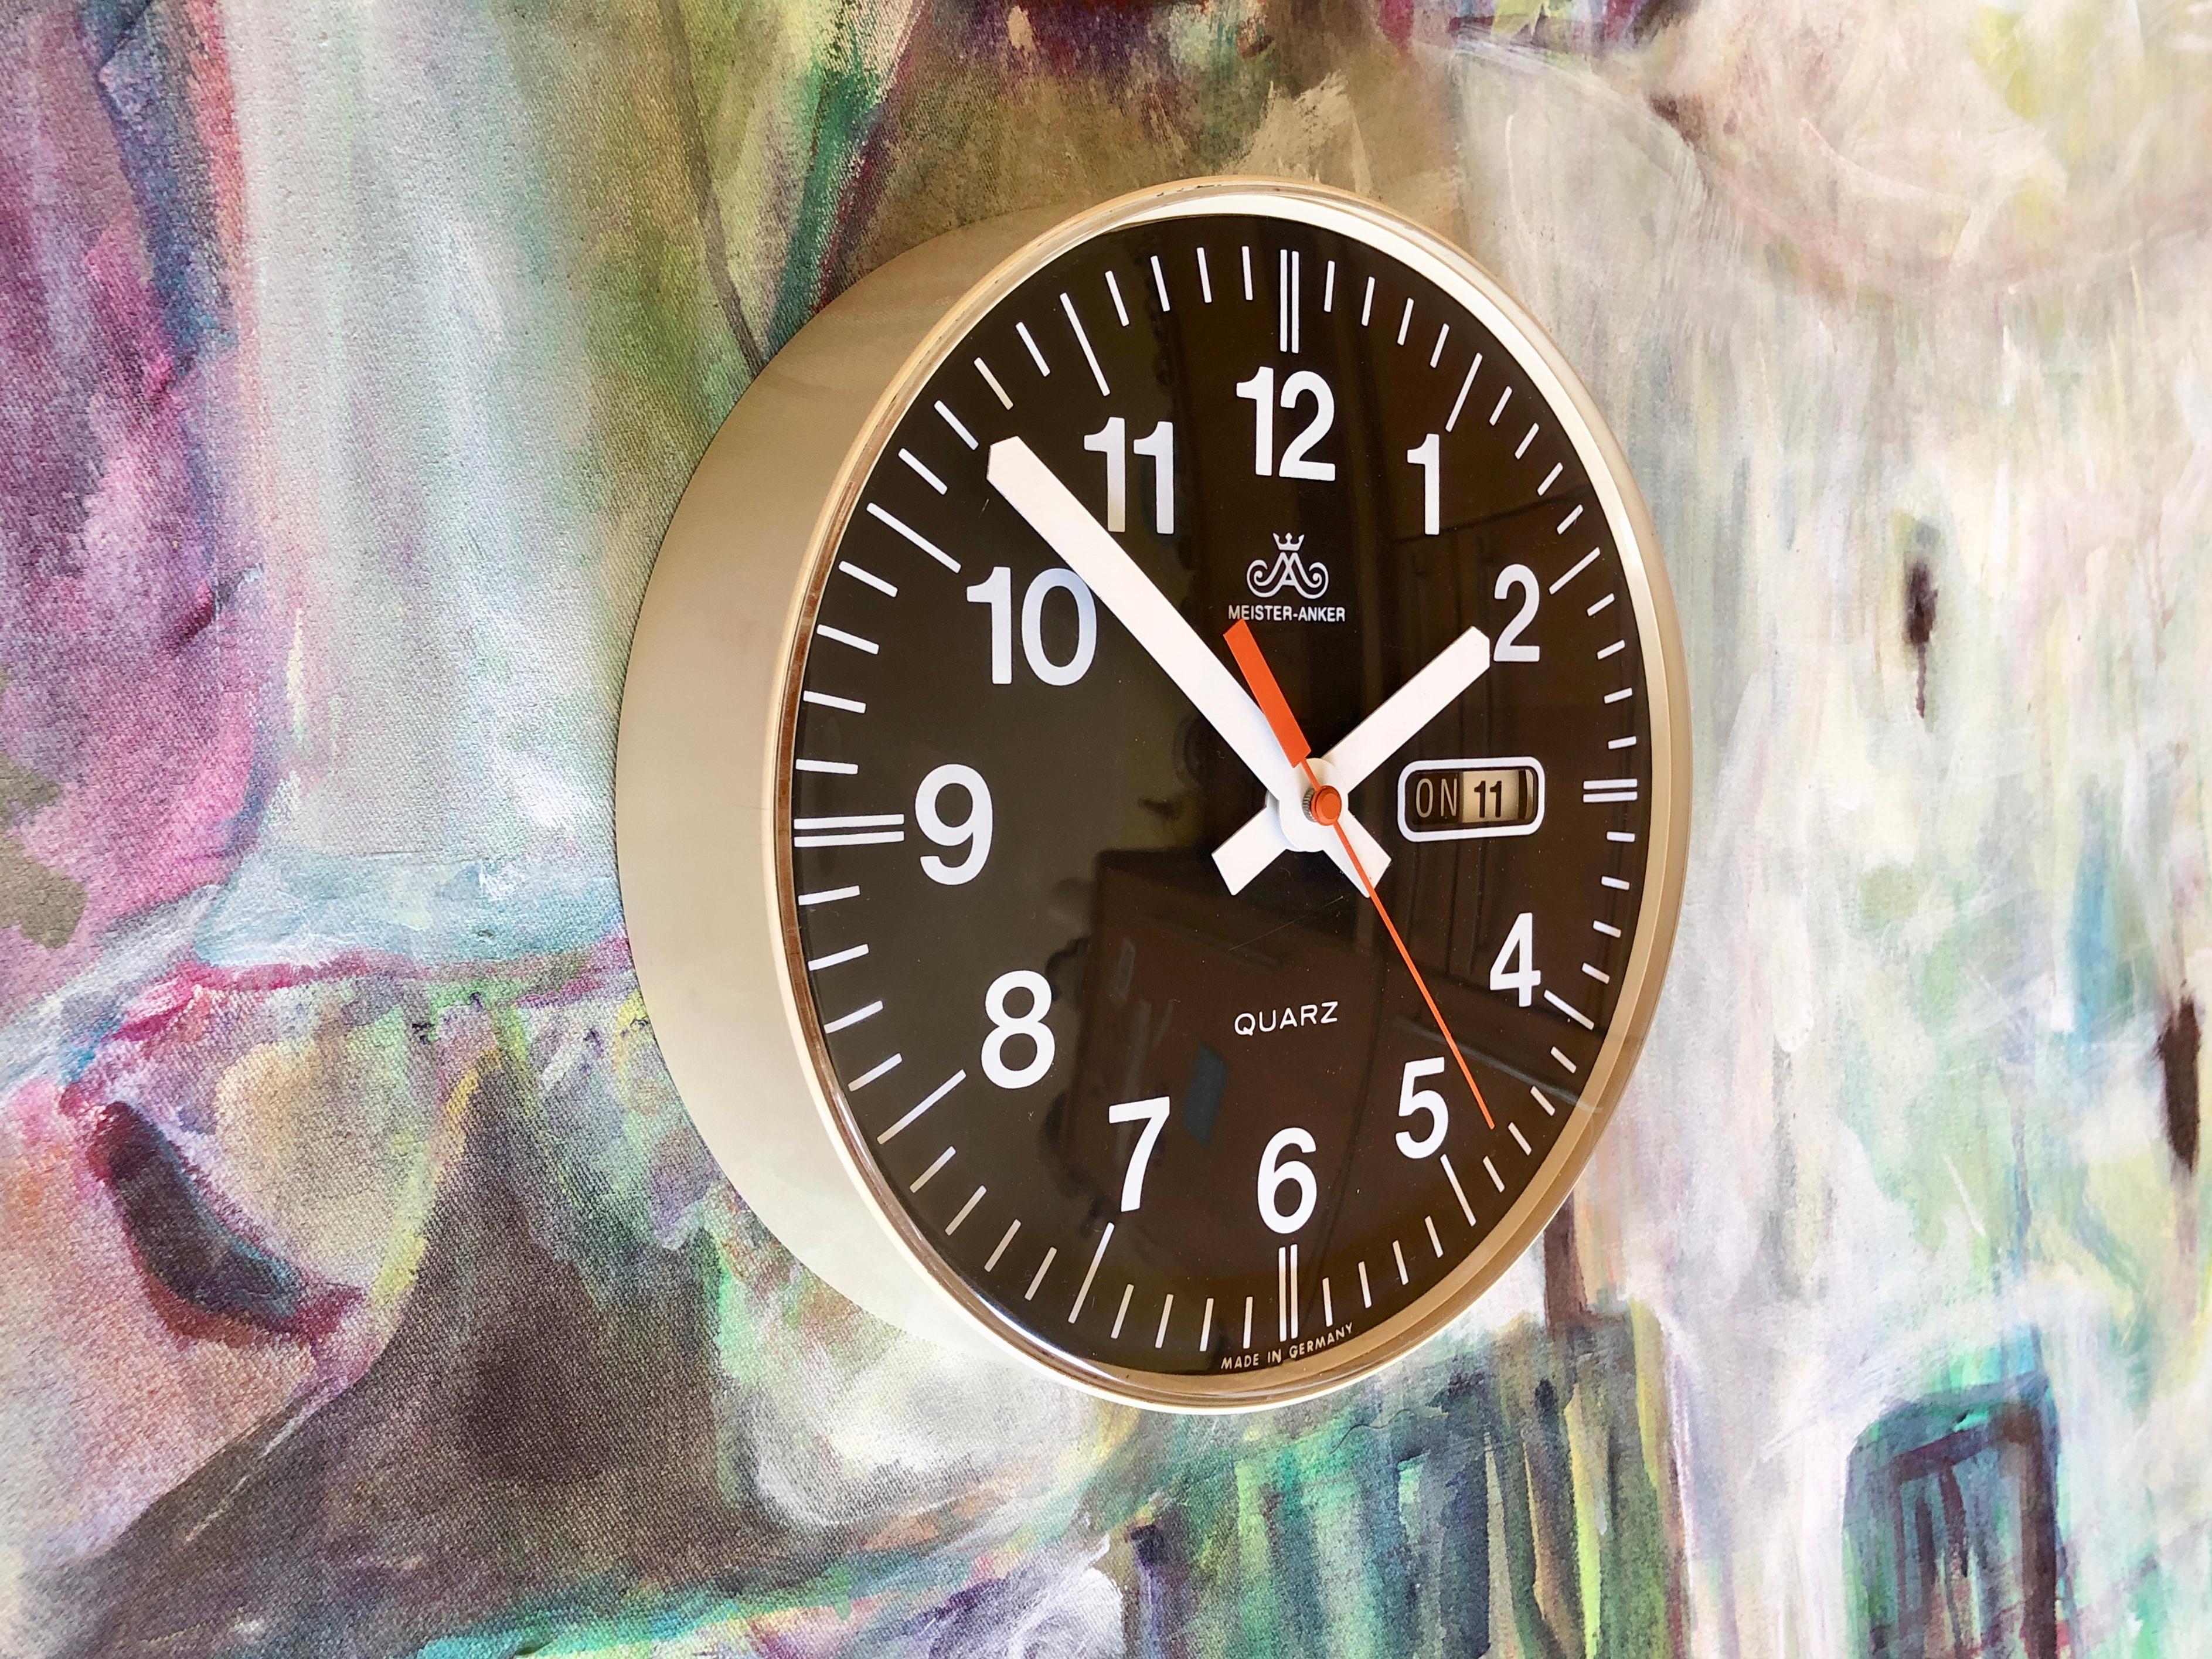 Funky wall clock (quartz) from the 60s - 70s of the 20th century.
By Meister-Anker, made in Germany.
Wonderful mid-century design: minimalist, high-contrast & timeless.

The cool thing about the watch is first of all the colours, and then the fact